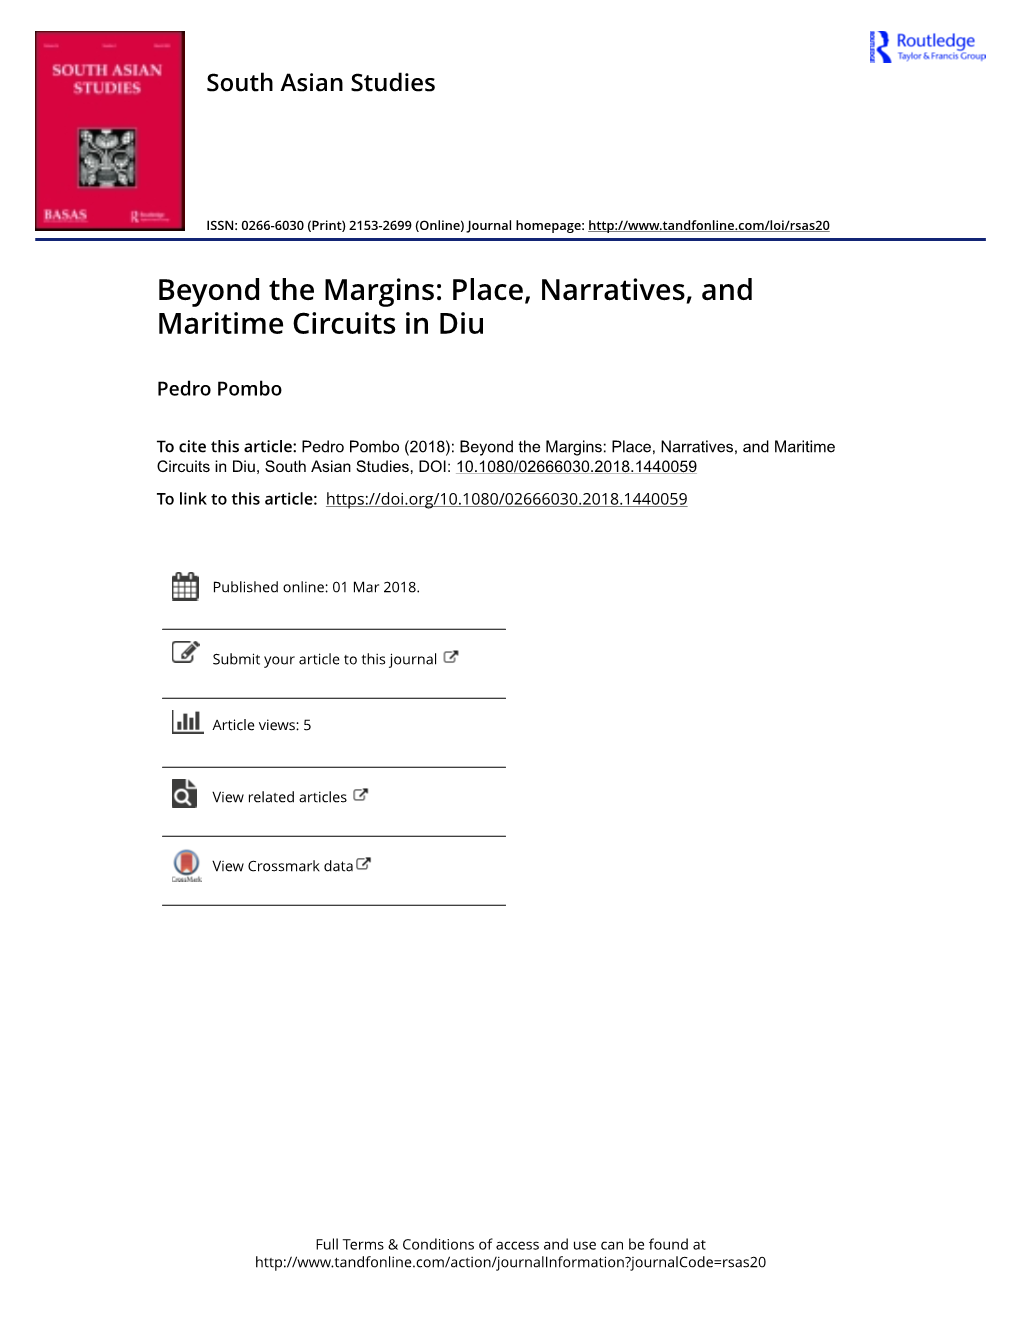 Beyond the Margins: Place, Narratives, and Maritime Circuits in Diu